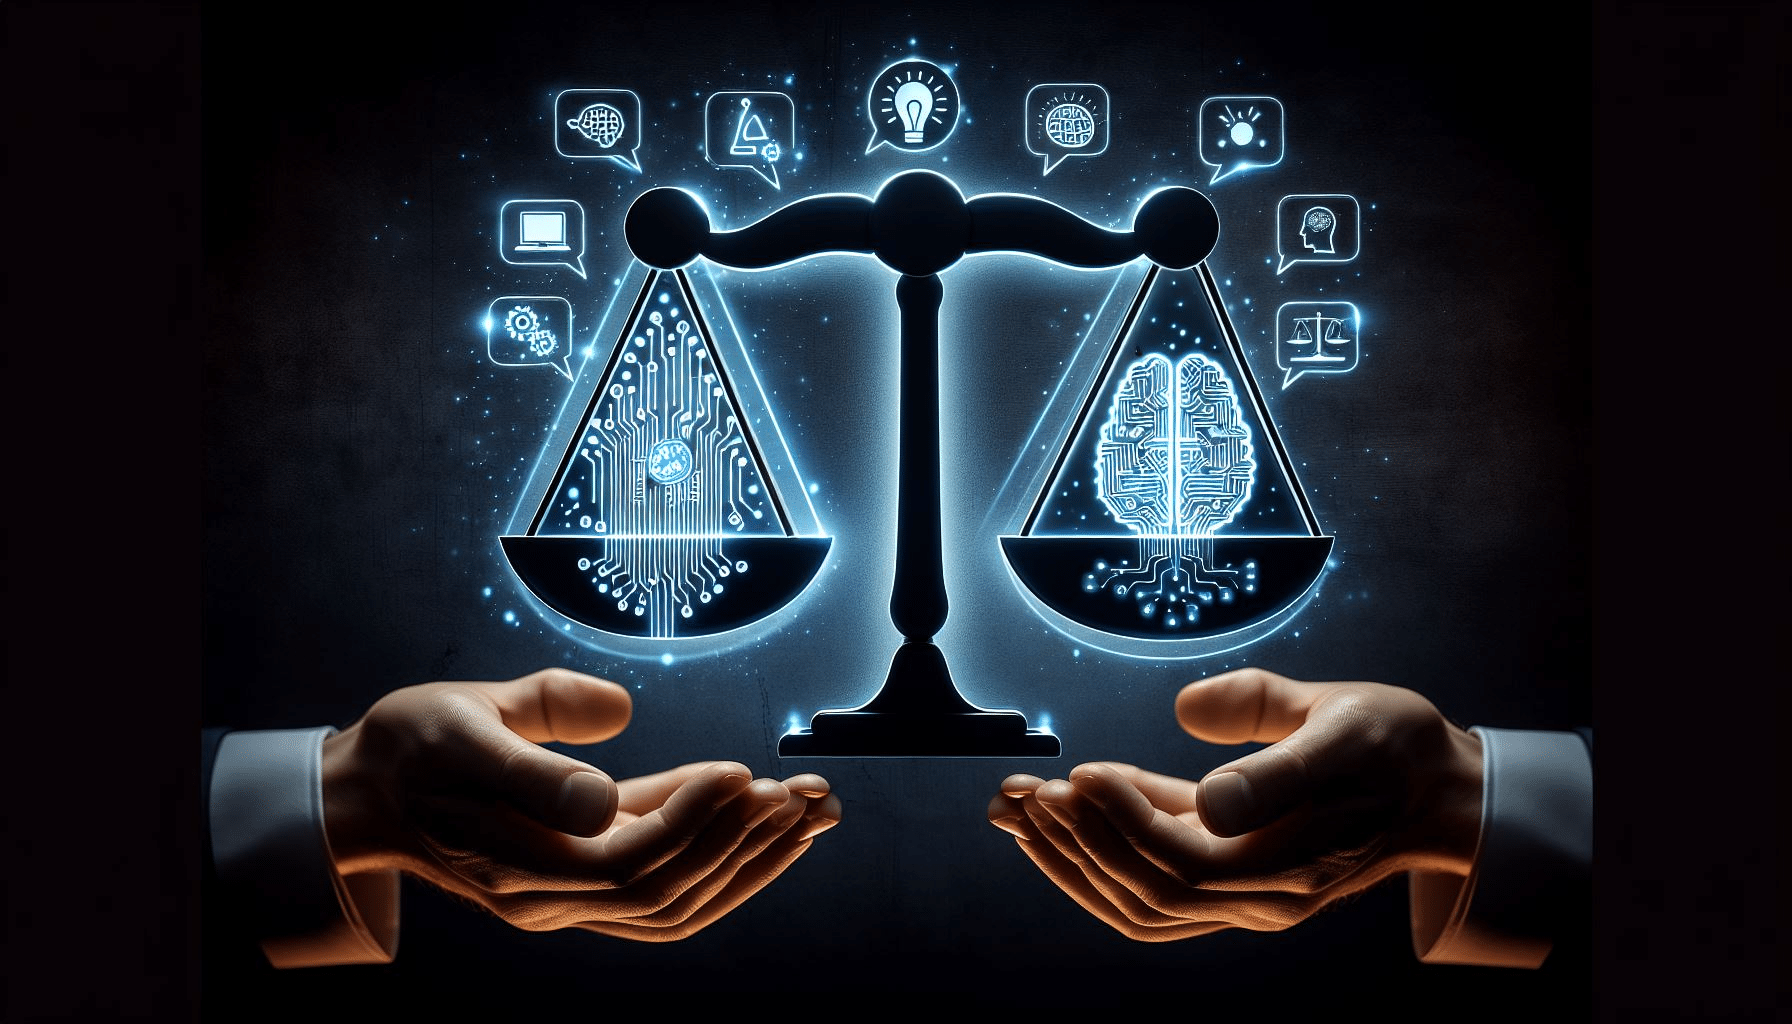 Two hands holding an illuminated icon of balanced scales, flanked by artificial intelligence (circuit-like outline) and human intelligence (brain outline with circuits). Speech bubbles above each intelligence icon indicate communication, and an arc-shaped arrow connects them, symbolizing the balance and exchange between responsible AI development and ethical considerations.